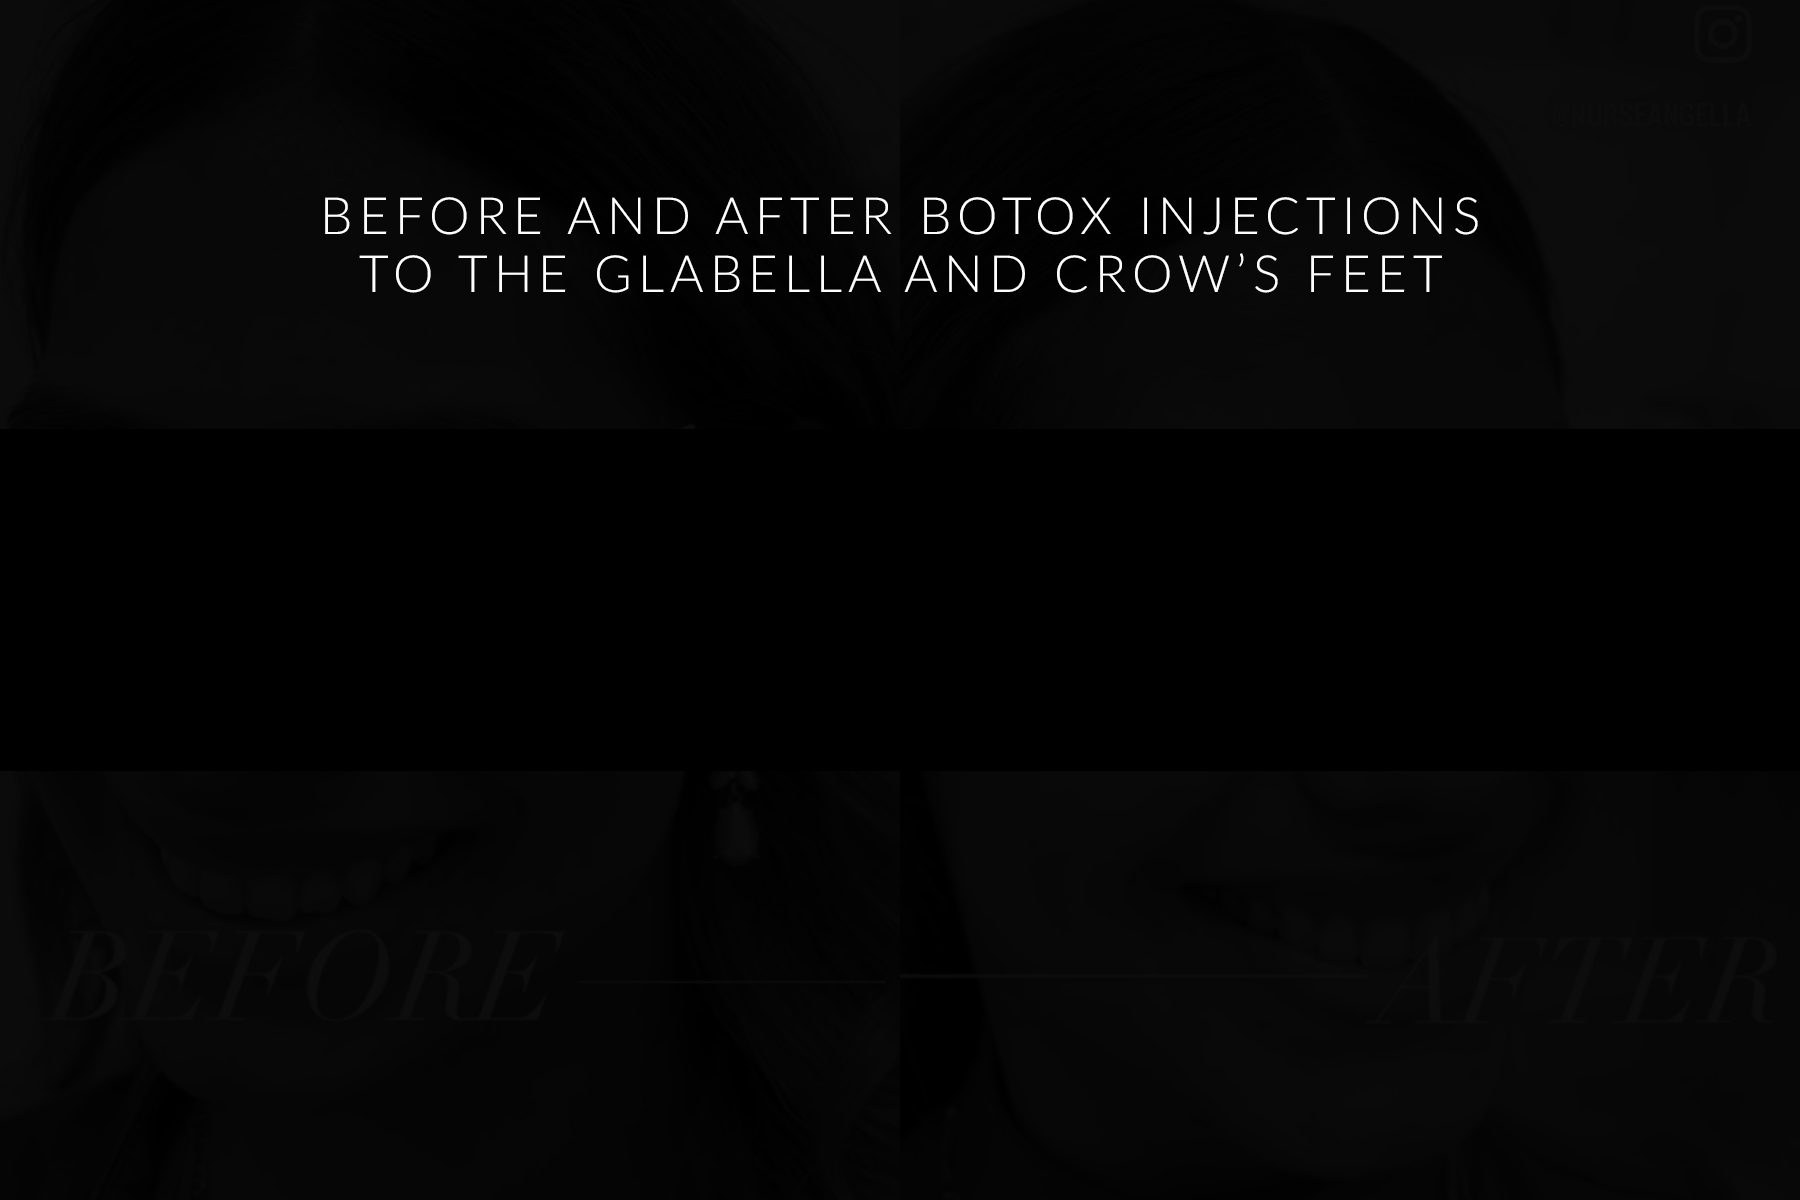 before and after botox injection video